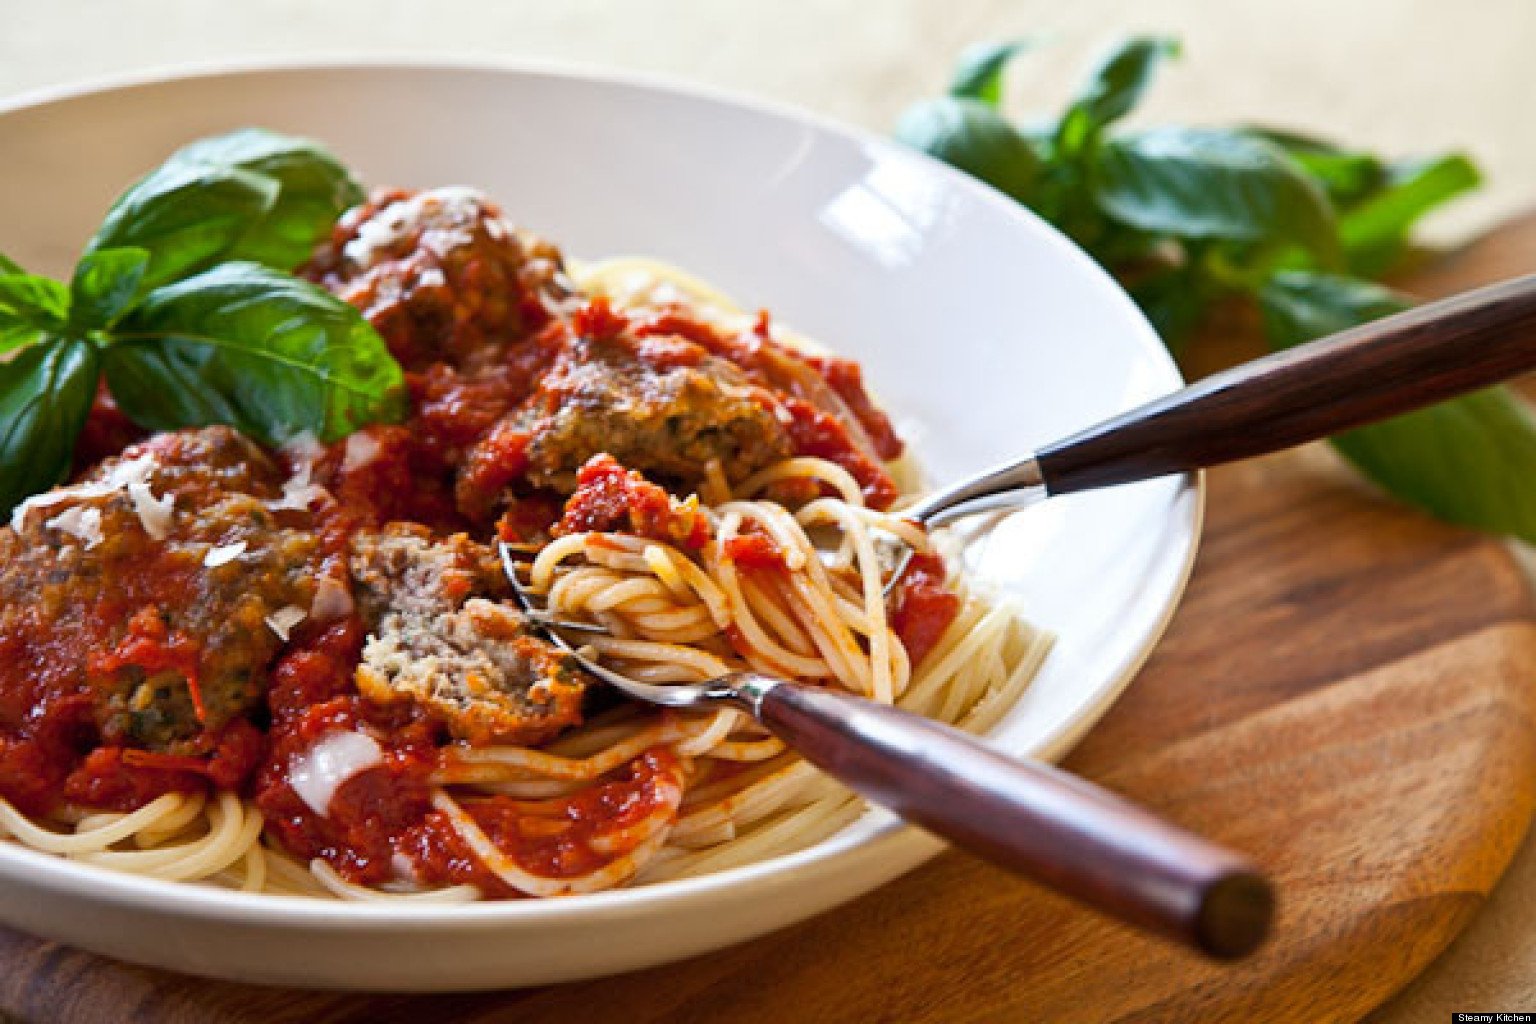 Satisfy Your Pasta Cravings With This List of Best Italian Restaurants In Town!